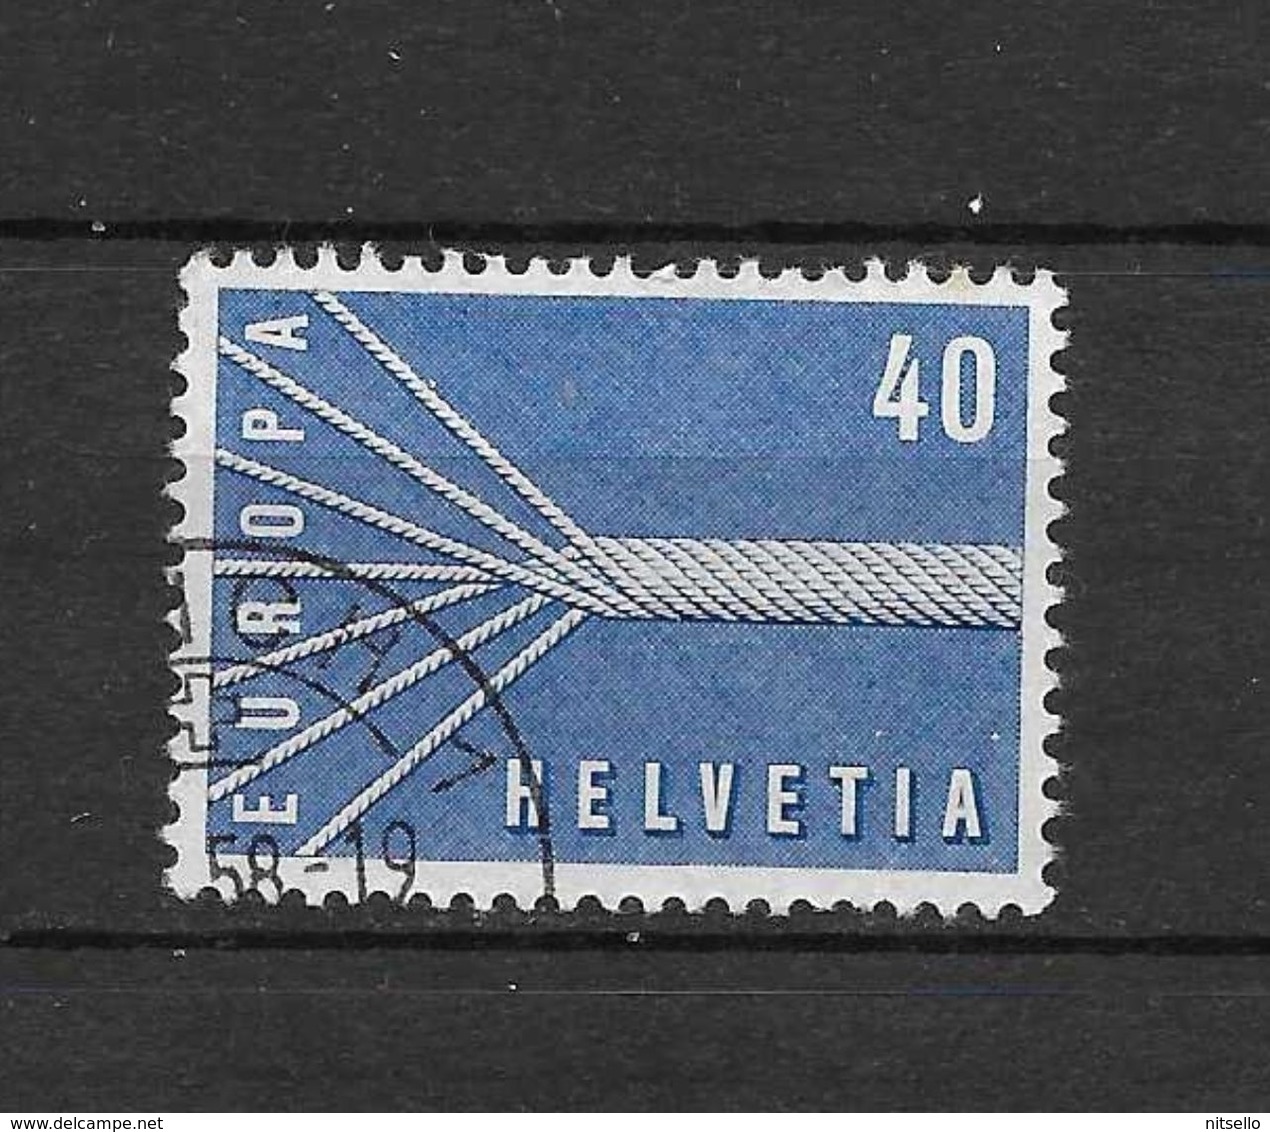 LOTE 1375  ///  (C003)  SUIZA  1957   YVERT Nº: 596   ¡¡¡¡¡ LIQUIDATION !!!!!!! - Used Stamps